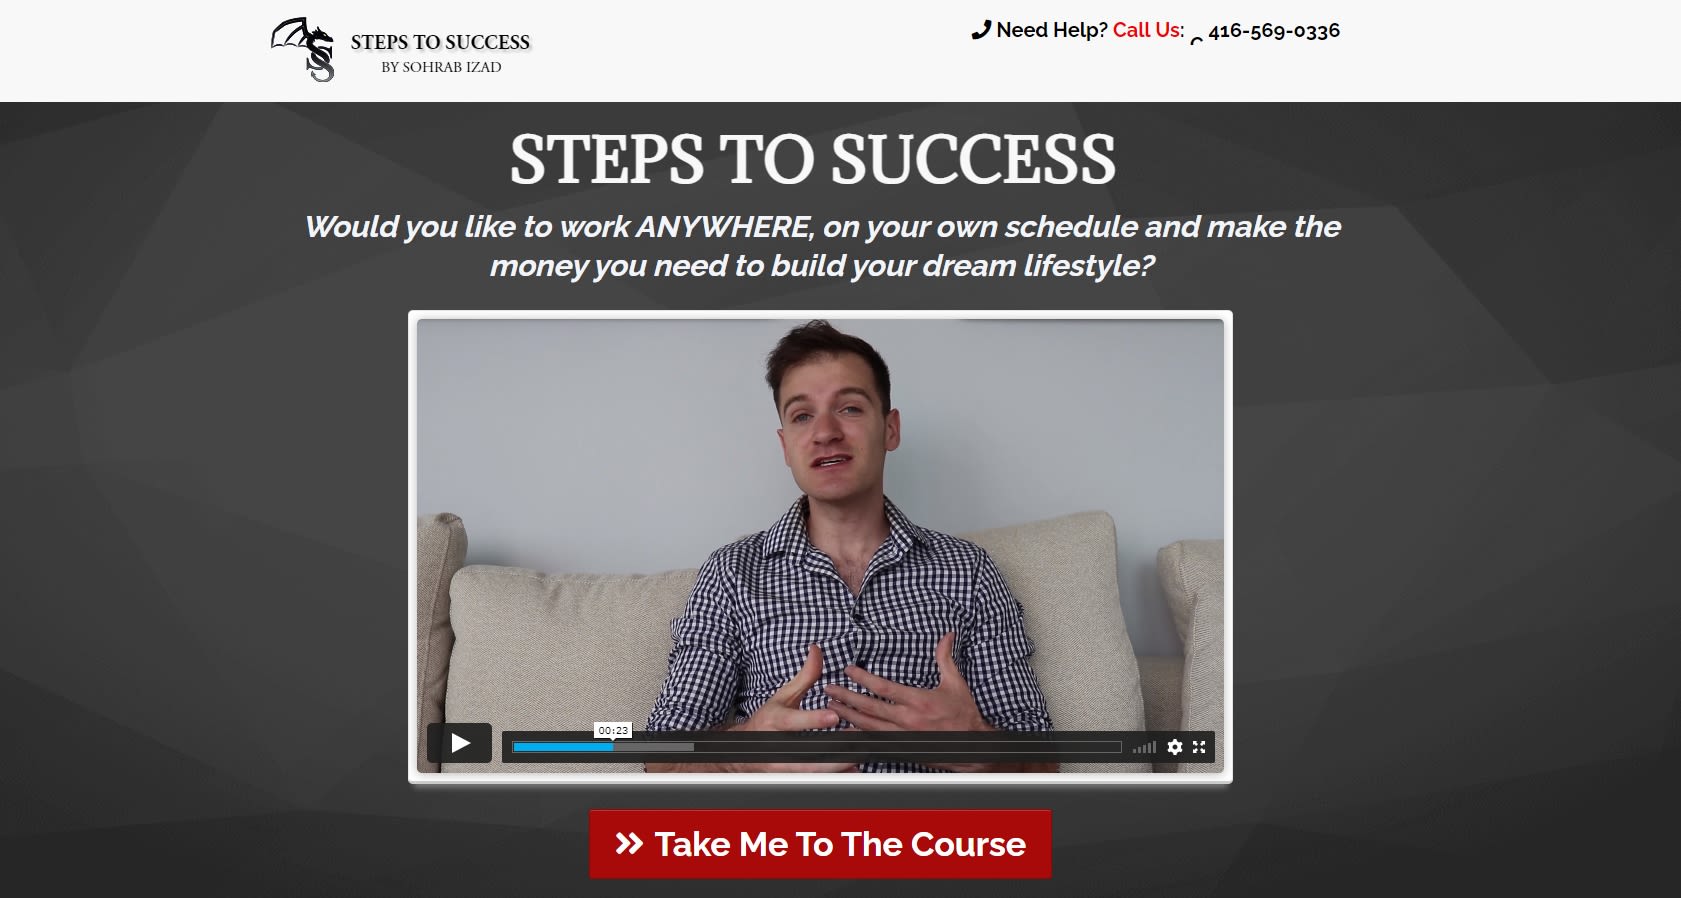 Amazon FBA course #2 - Steps to Success